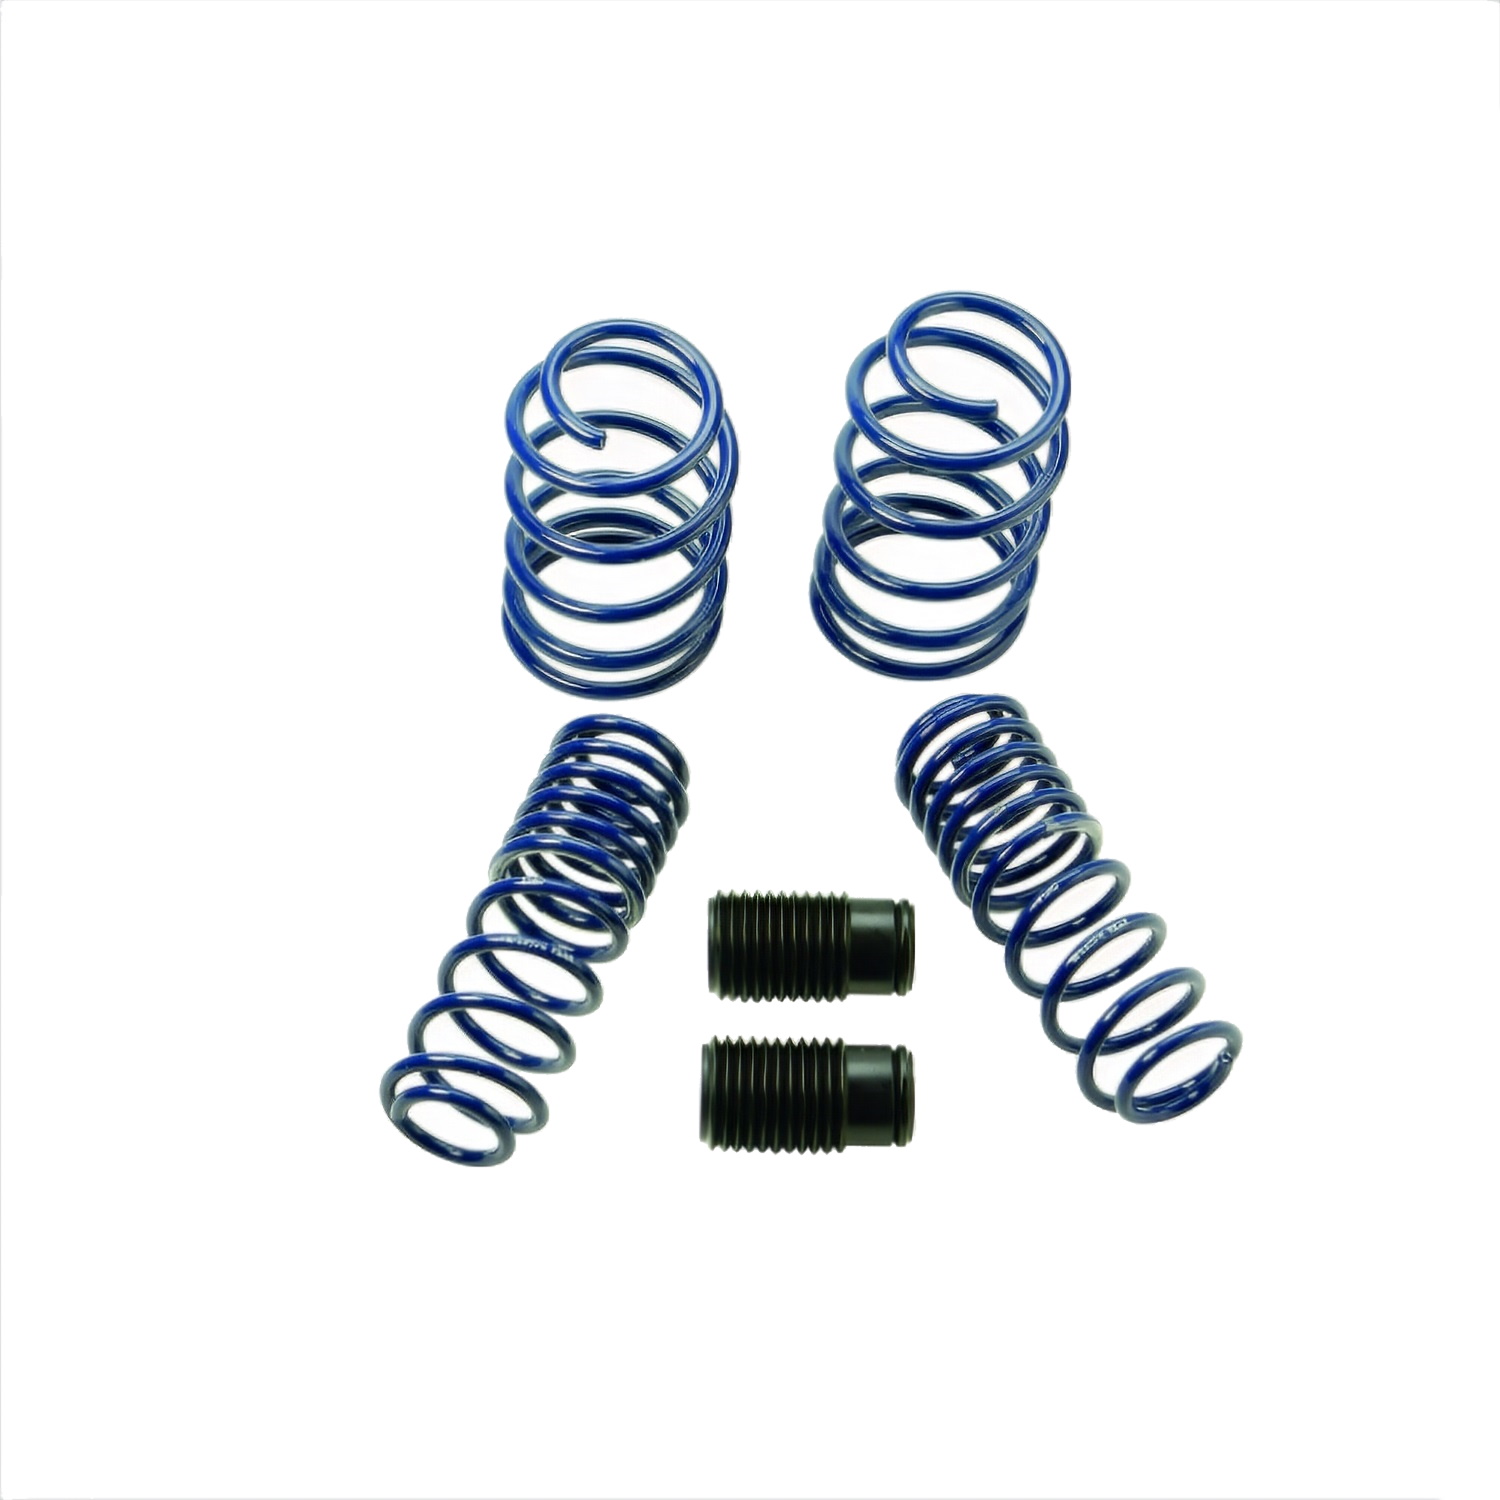 Ford Racing Ford Racing M-5300-L Spring Kit Fits 07-14 Mustang